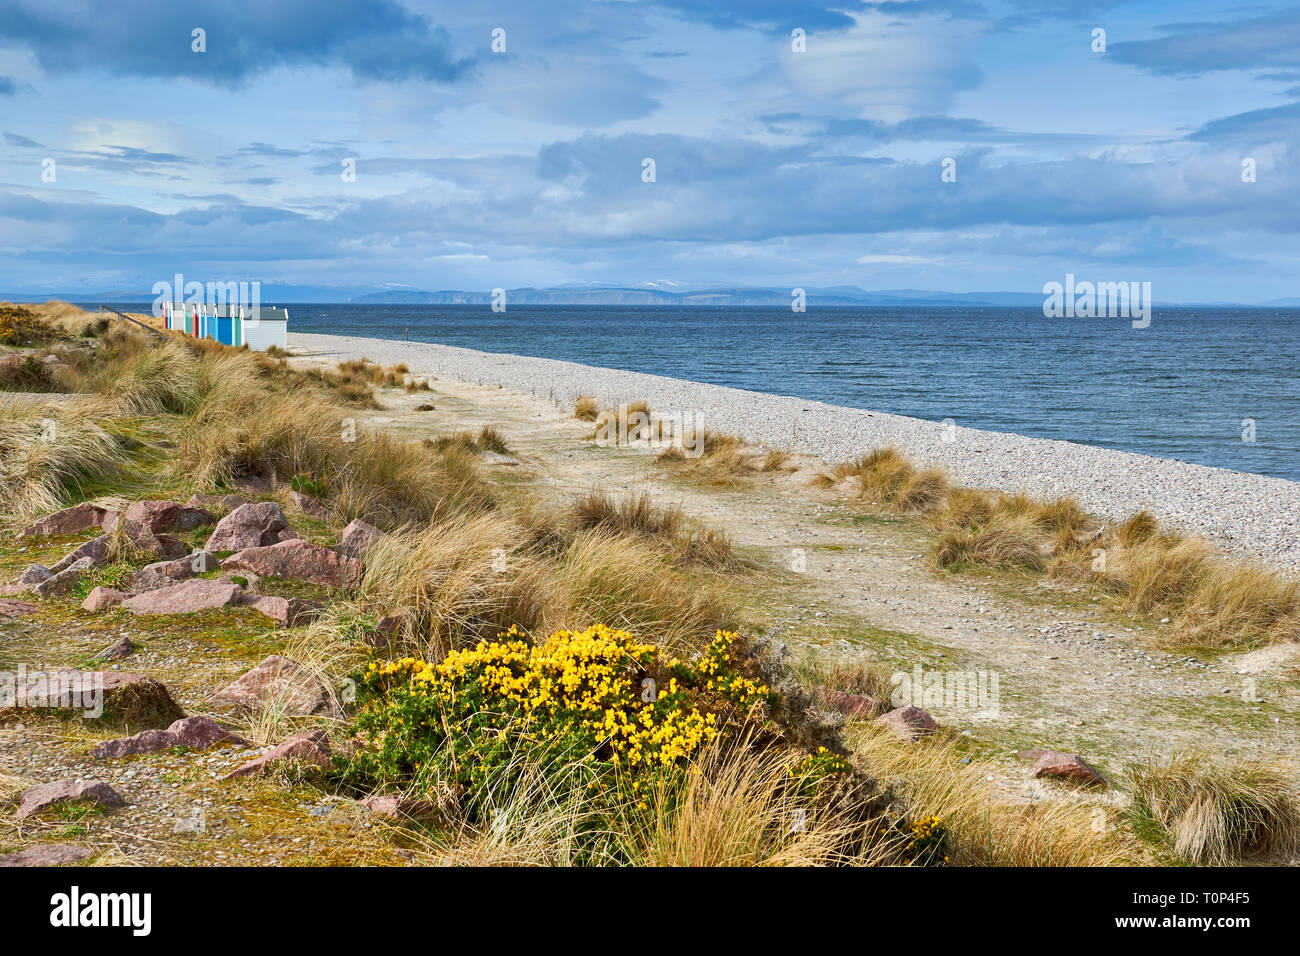 FINDHORN BEACH MORAY FIRTH SCOTLAND COLOURED CHALETS OR BEACH HUTS SNOW OVER THE HILLS AND BLACK ISLE Stock Photo